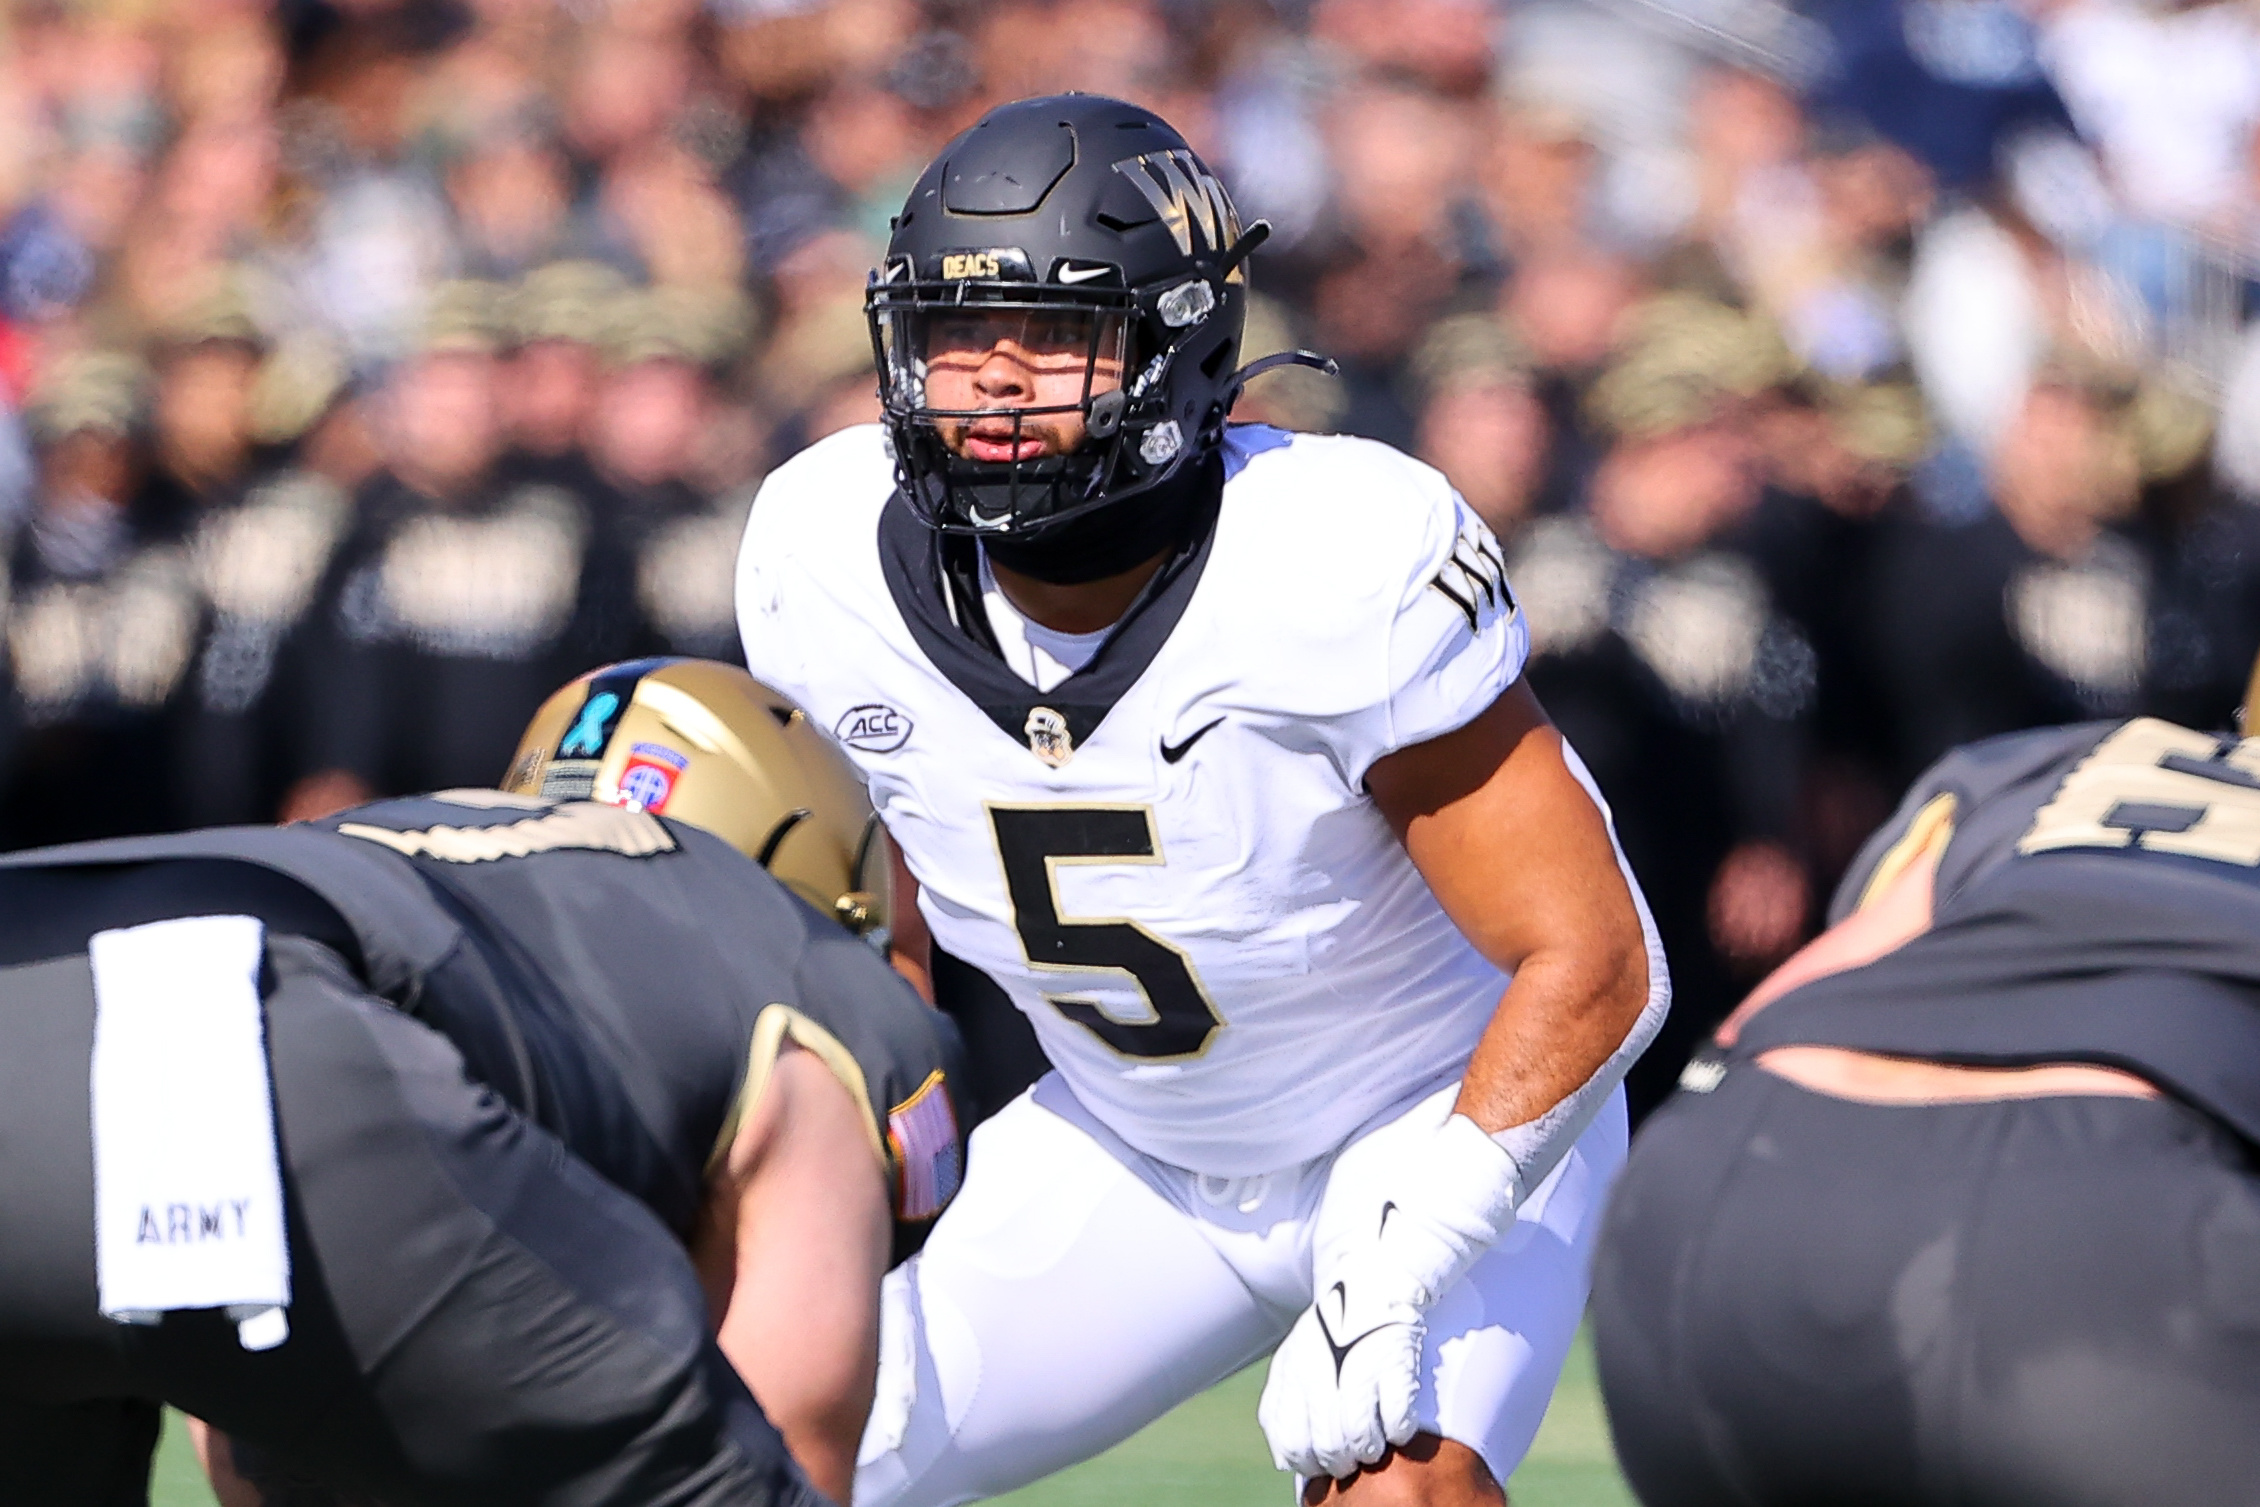 COLLEGE FOOTBALL: OCT 23 Wake Forest at Army